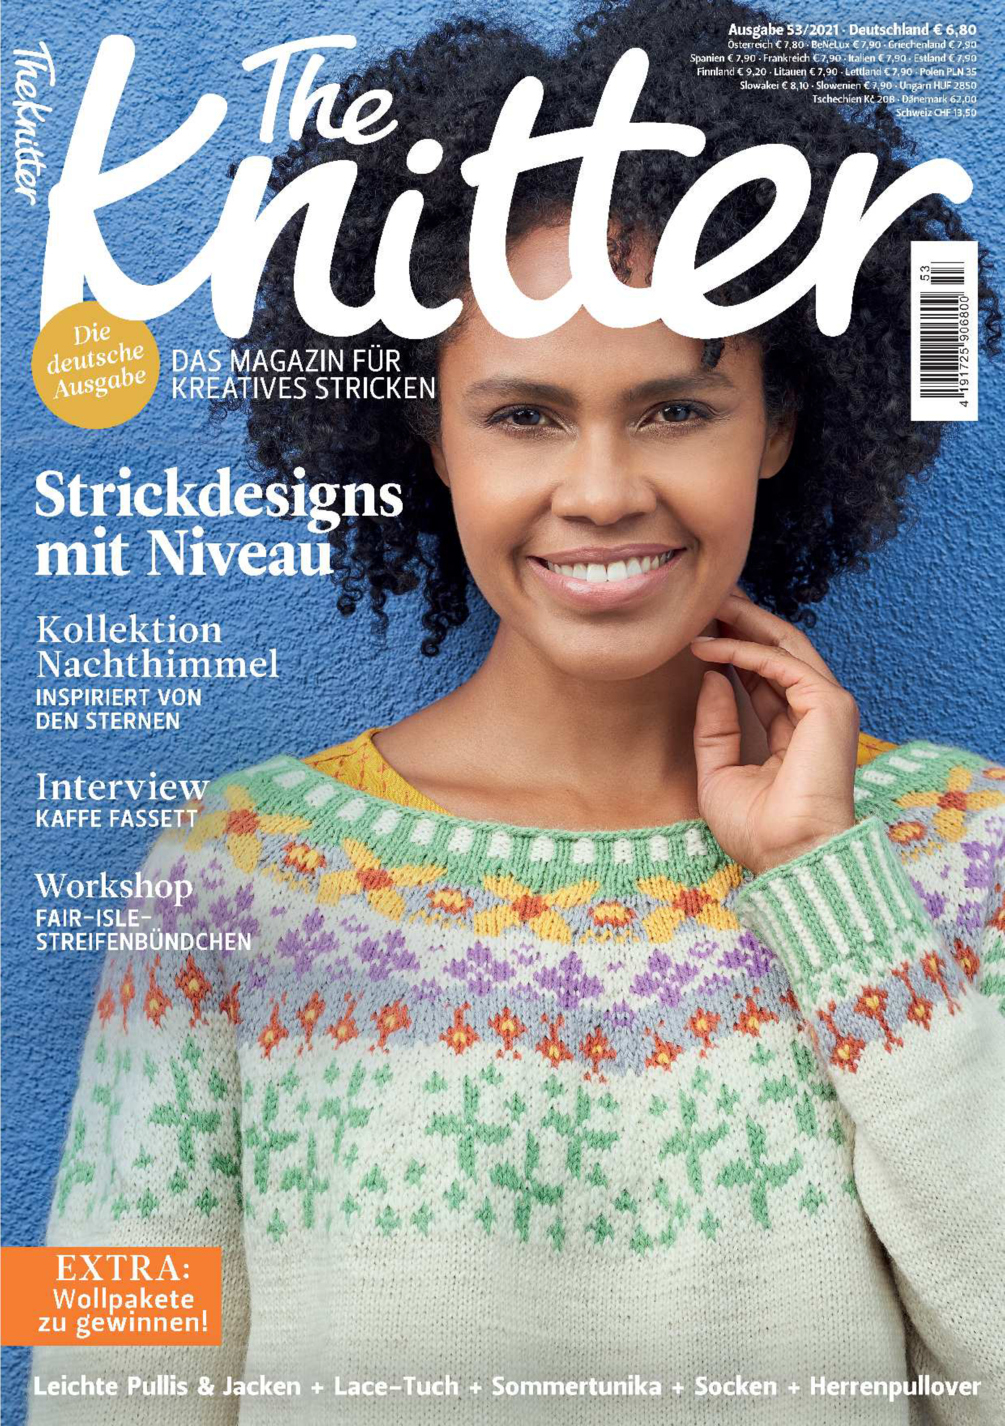 E-Paper: The Knitter 53/2021 - Strickdesigns mit Niveau